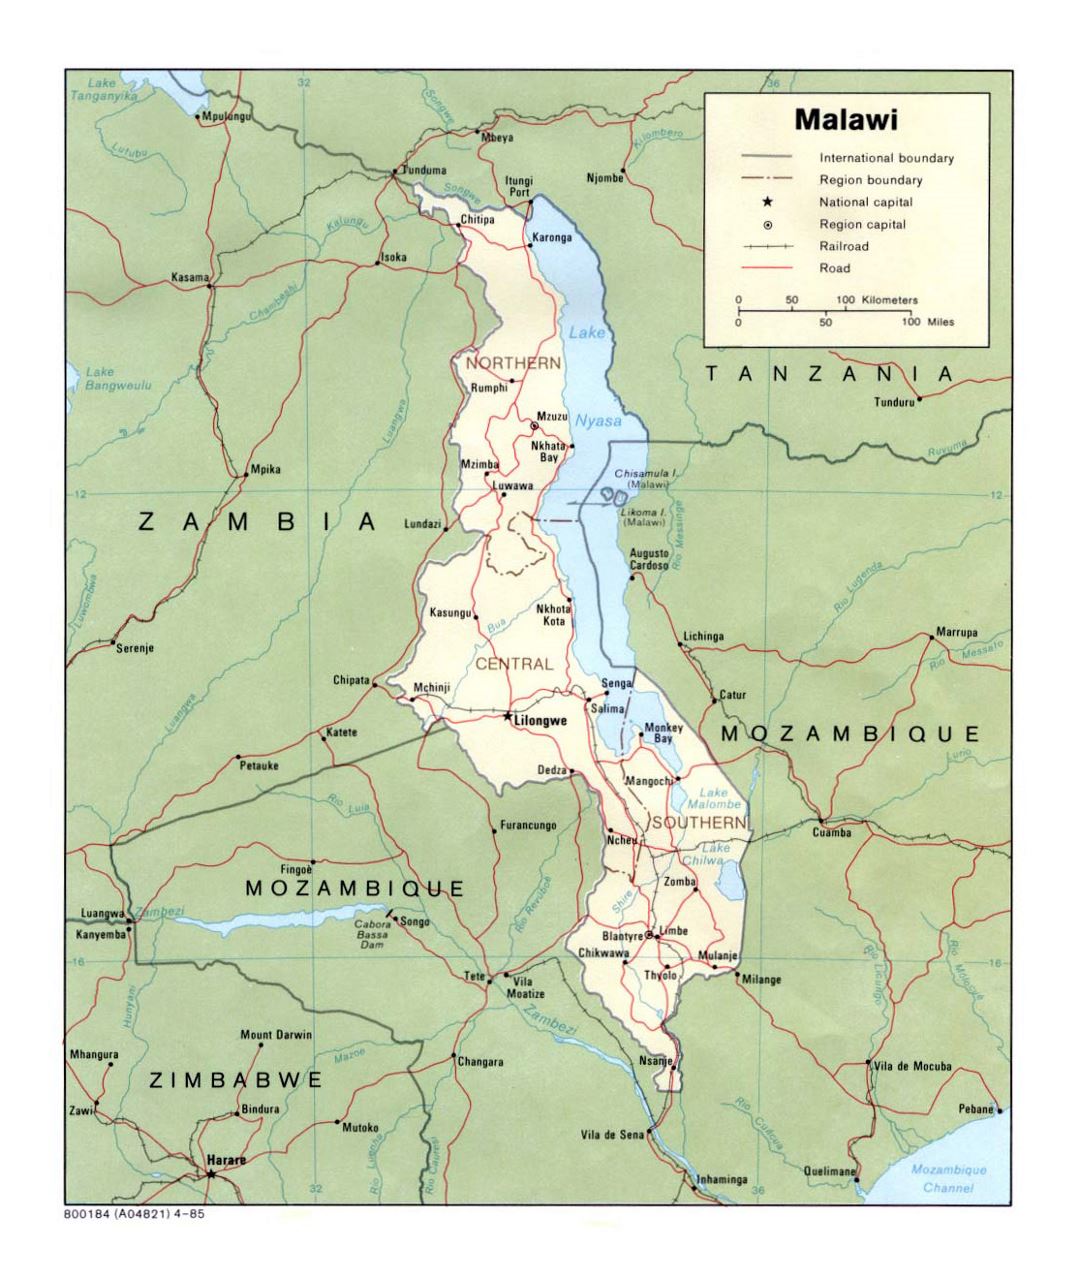 Detailed political and administrative map of Malawi with roads, railroads and major cities - 1985